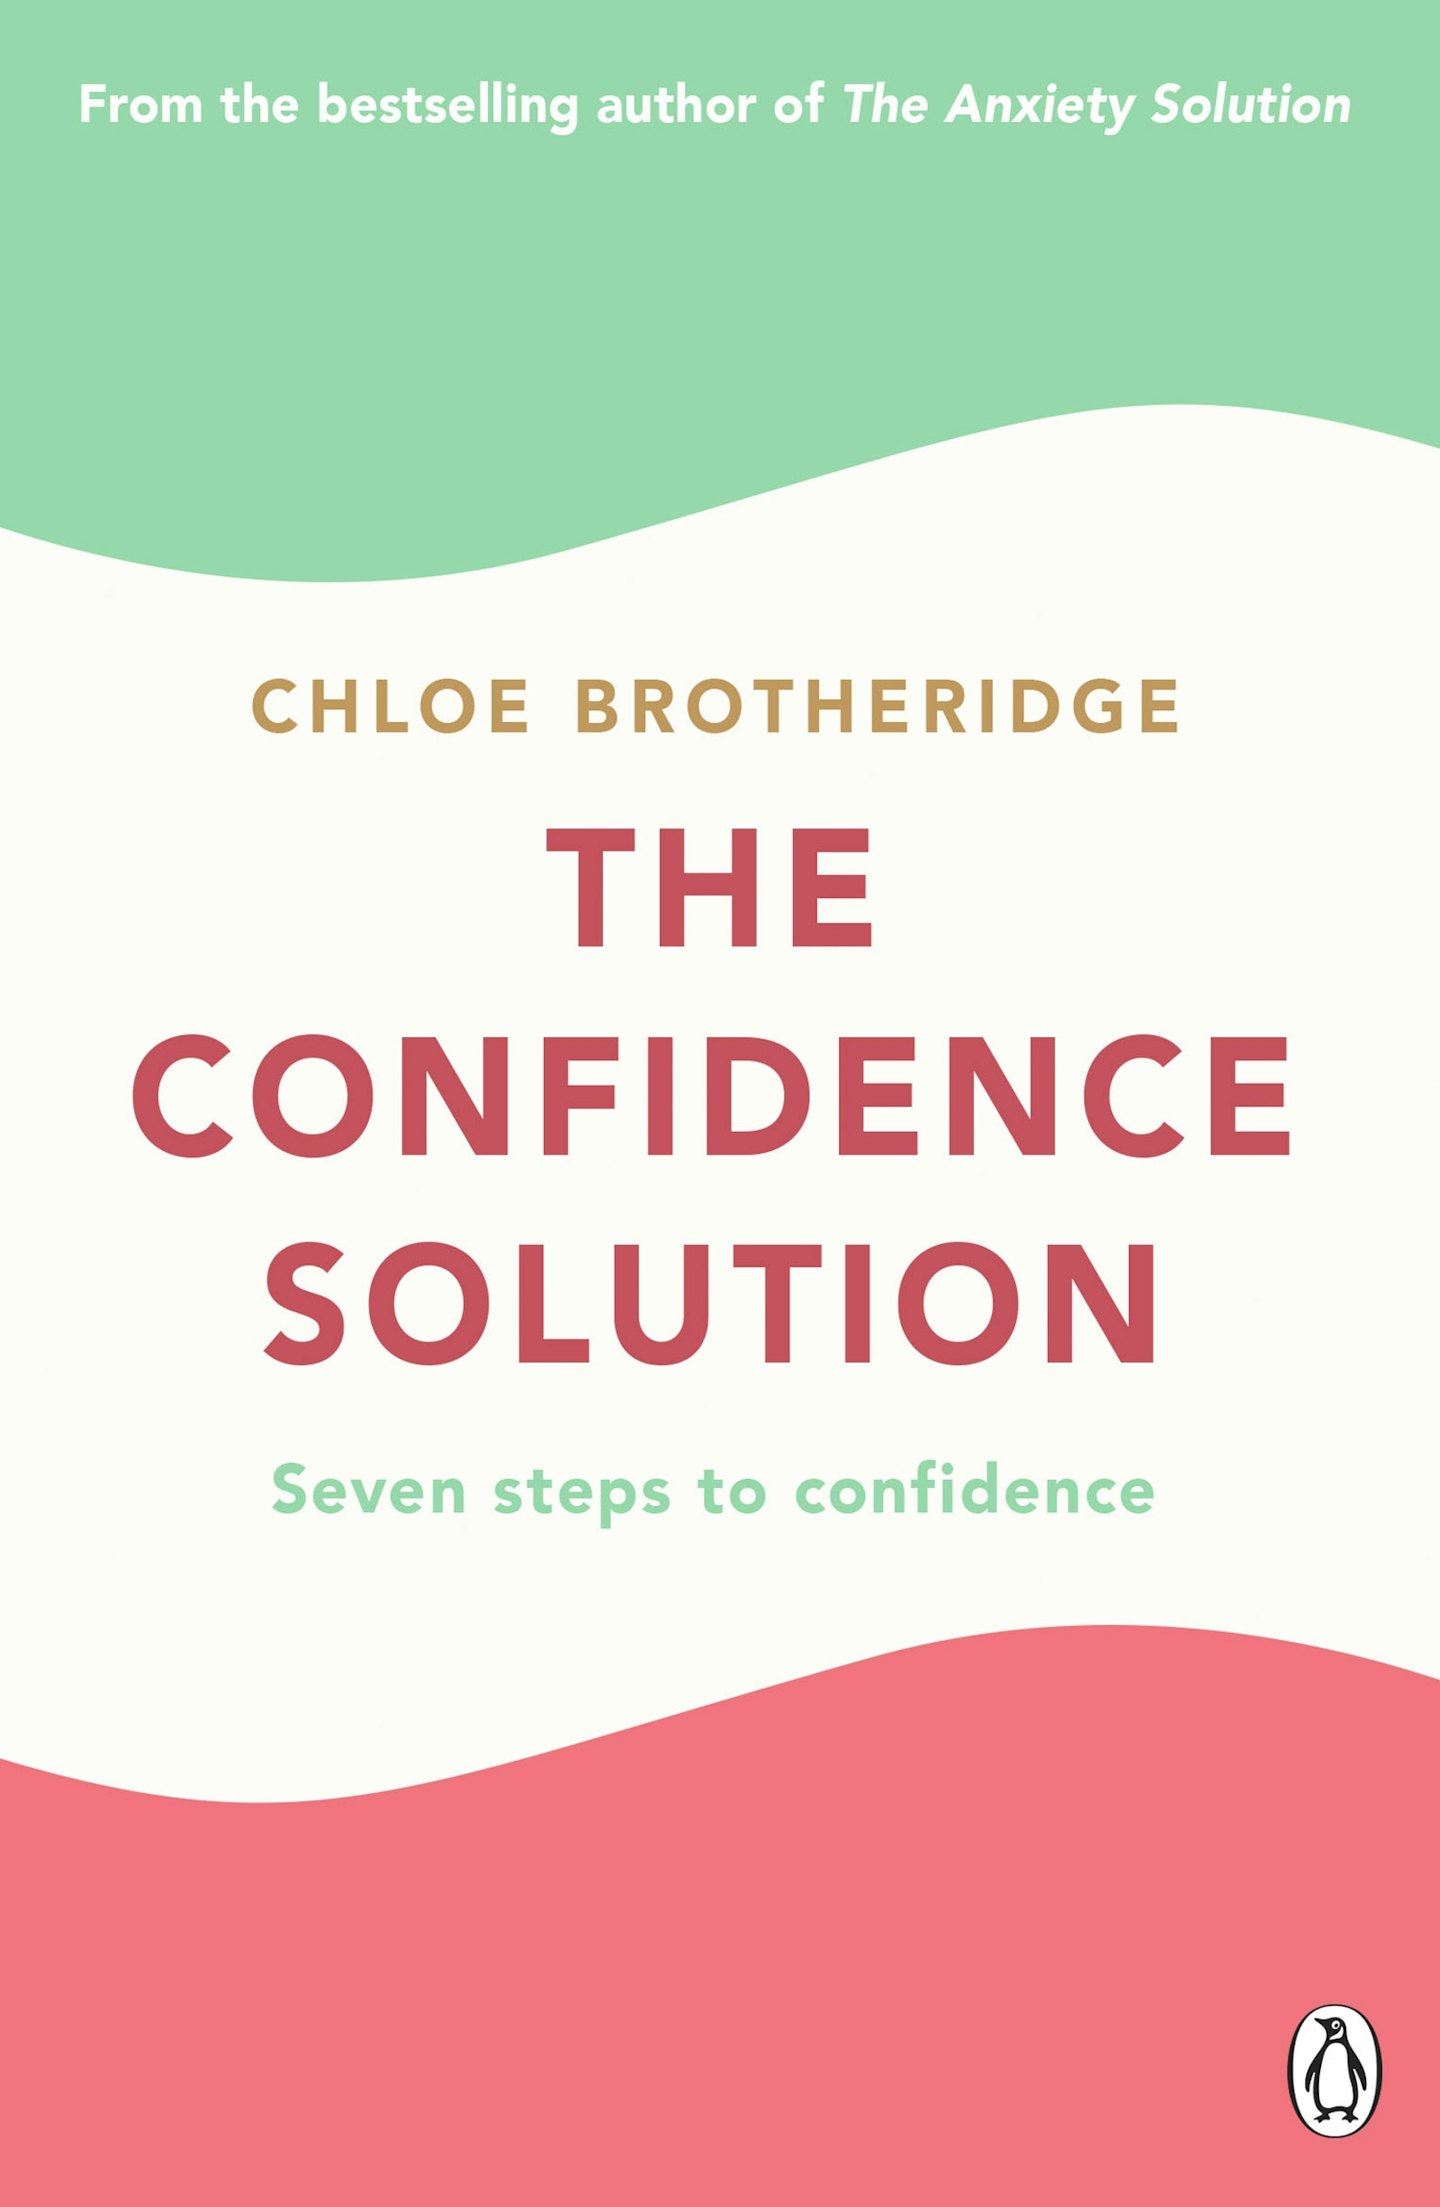 The Confidence Solution: Seven Steps to Confidence by Chloe Brotheridge